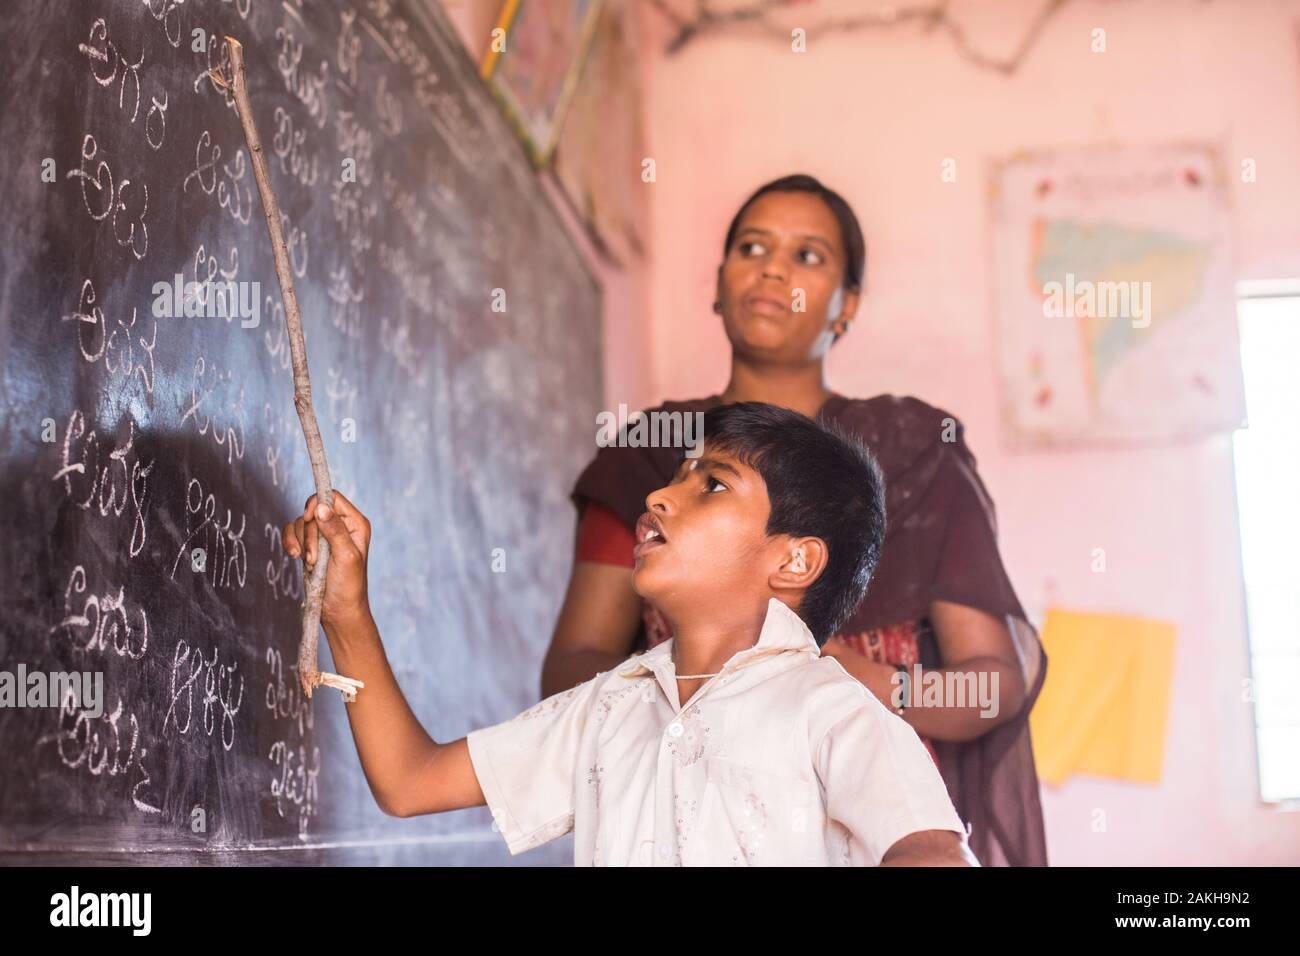 CAPTION: Until the age of five, Naveen - who has cerebral palsy - was confined to his bed. That was the point at which he got his first life-changing Stock Photo